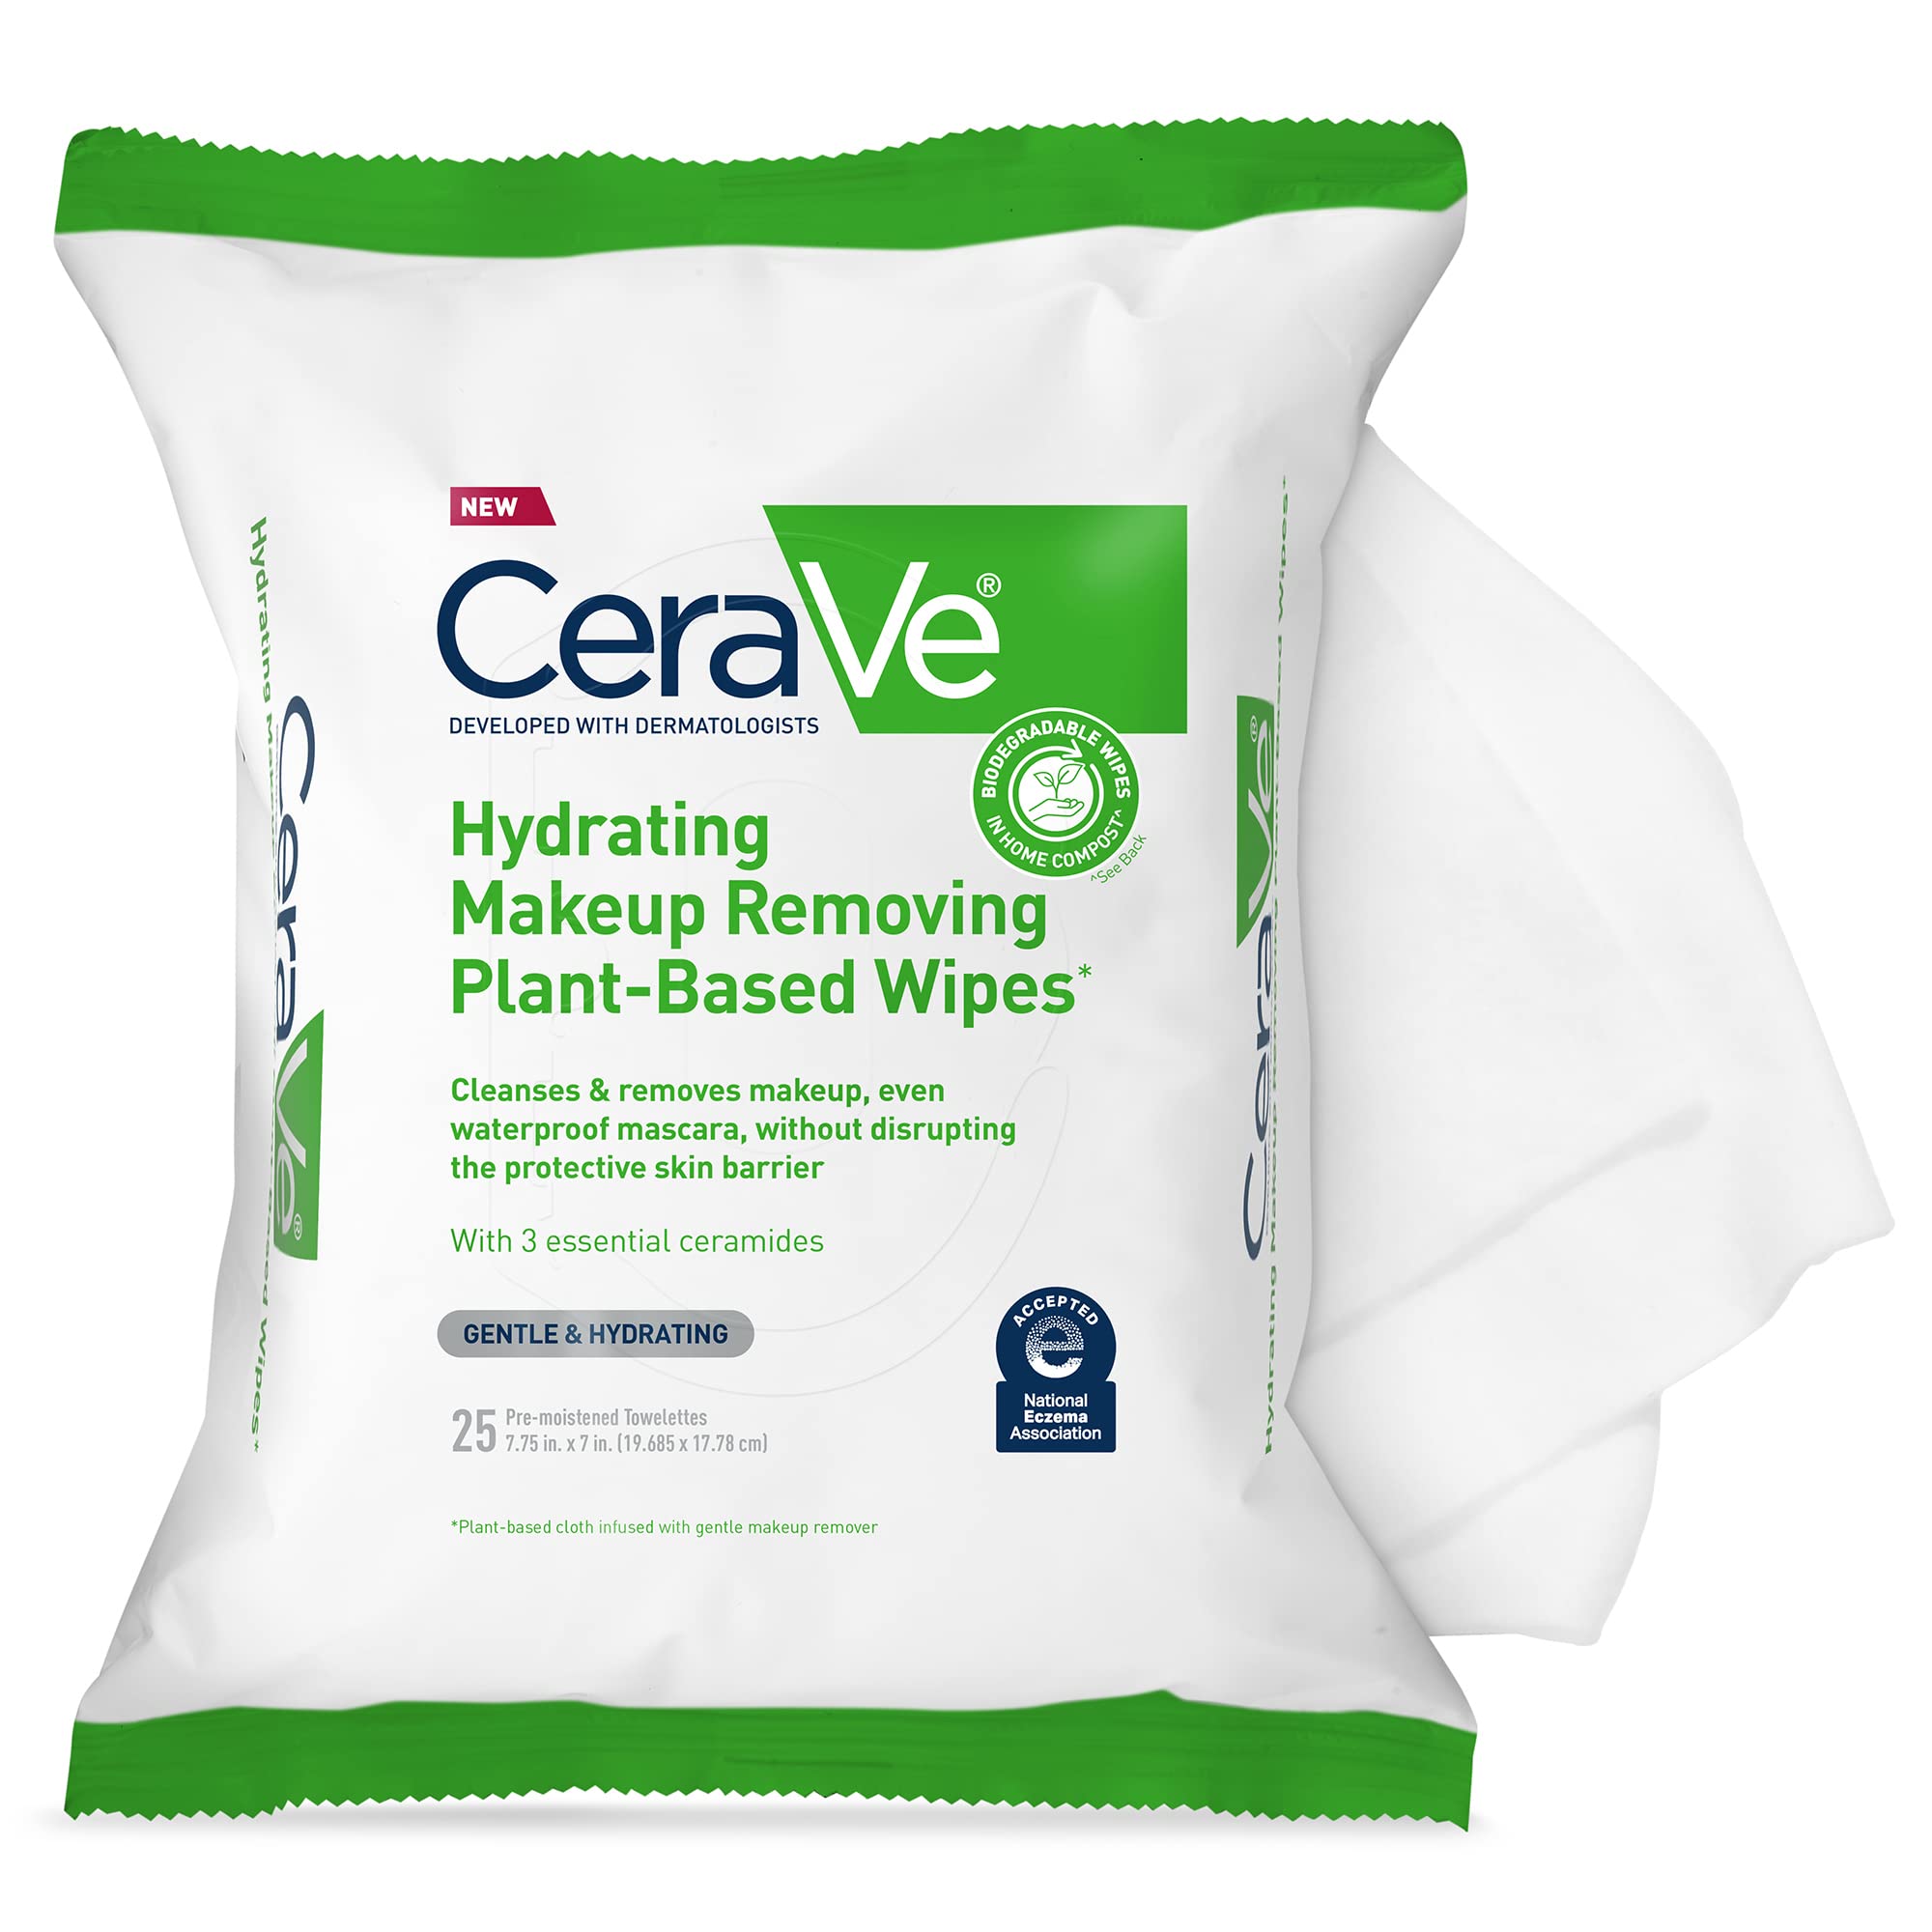 CeraVe Hydrating Facial Cleansing Makeup Remover Wipes| Plant Based Face Wipes| Biodegradable in Home Compost| Face Wash Cloth| Suitable for Sensitive Skin| Fragrance-free Non-comedogenic| 25 Count